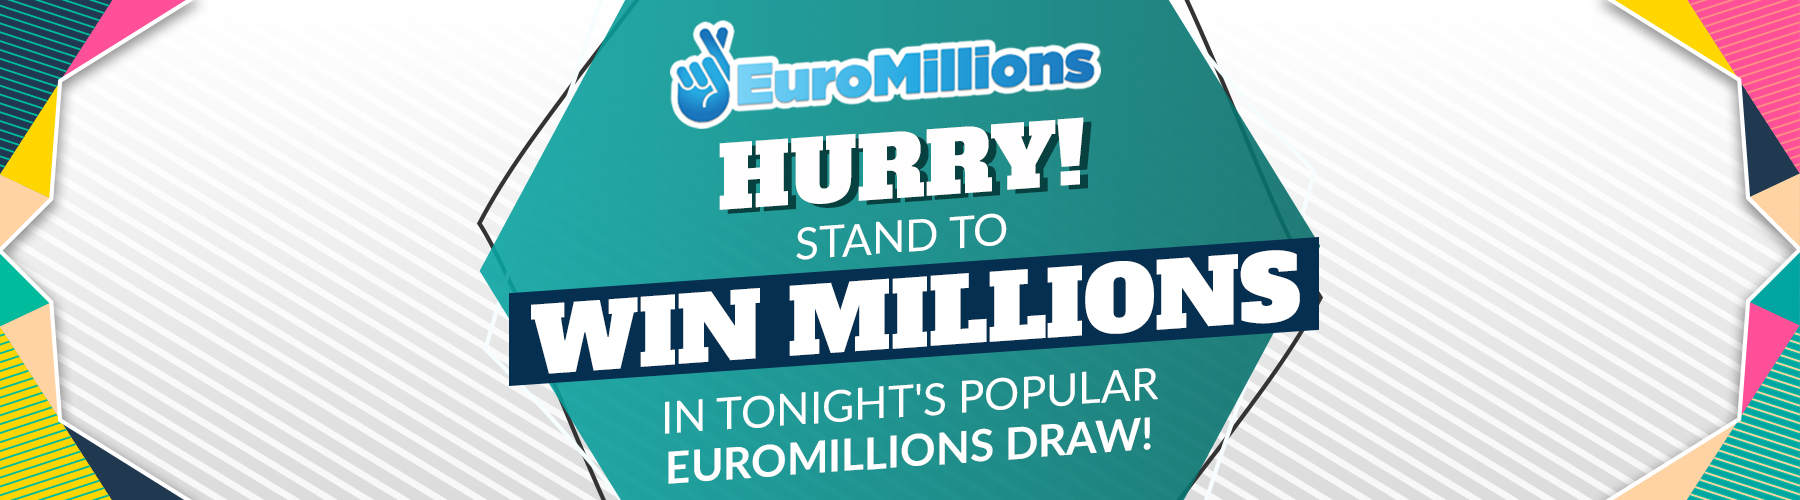 HURRY! Stand to WIN MILLIONS in tonight's draw!